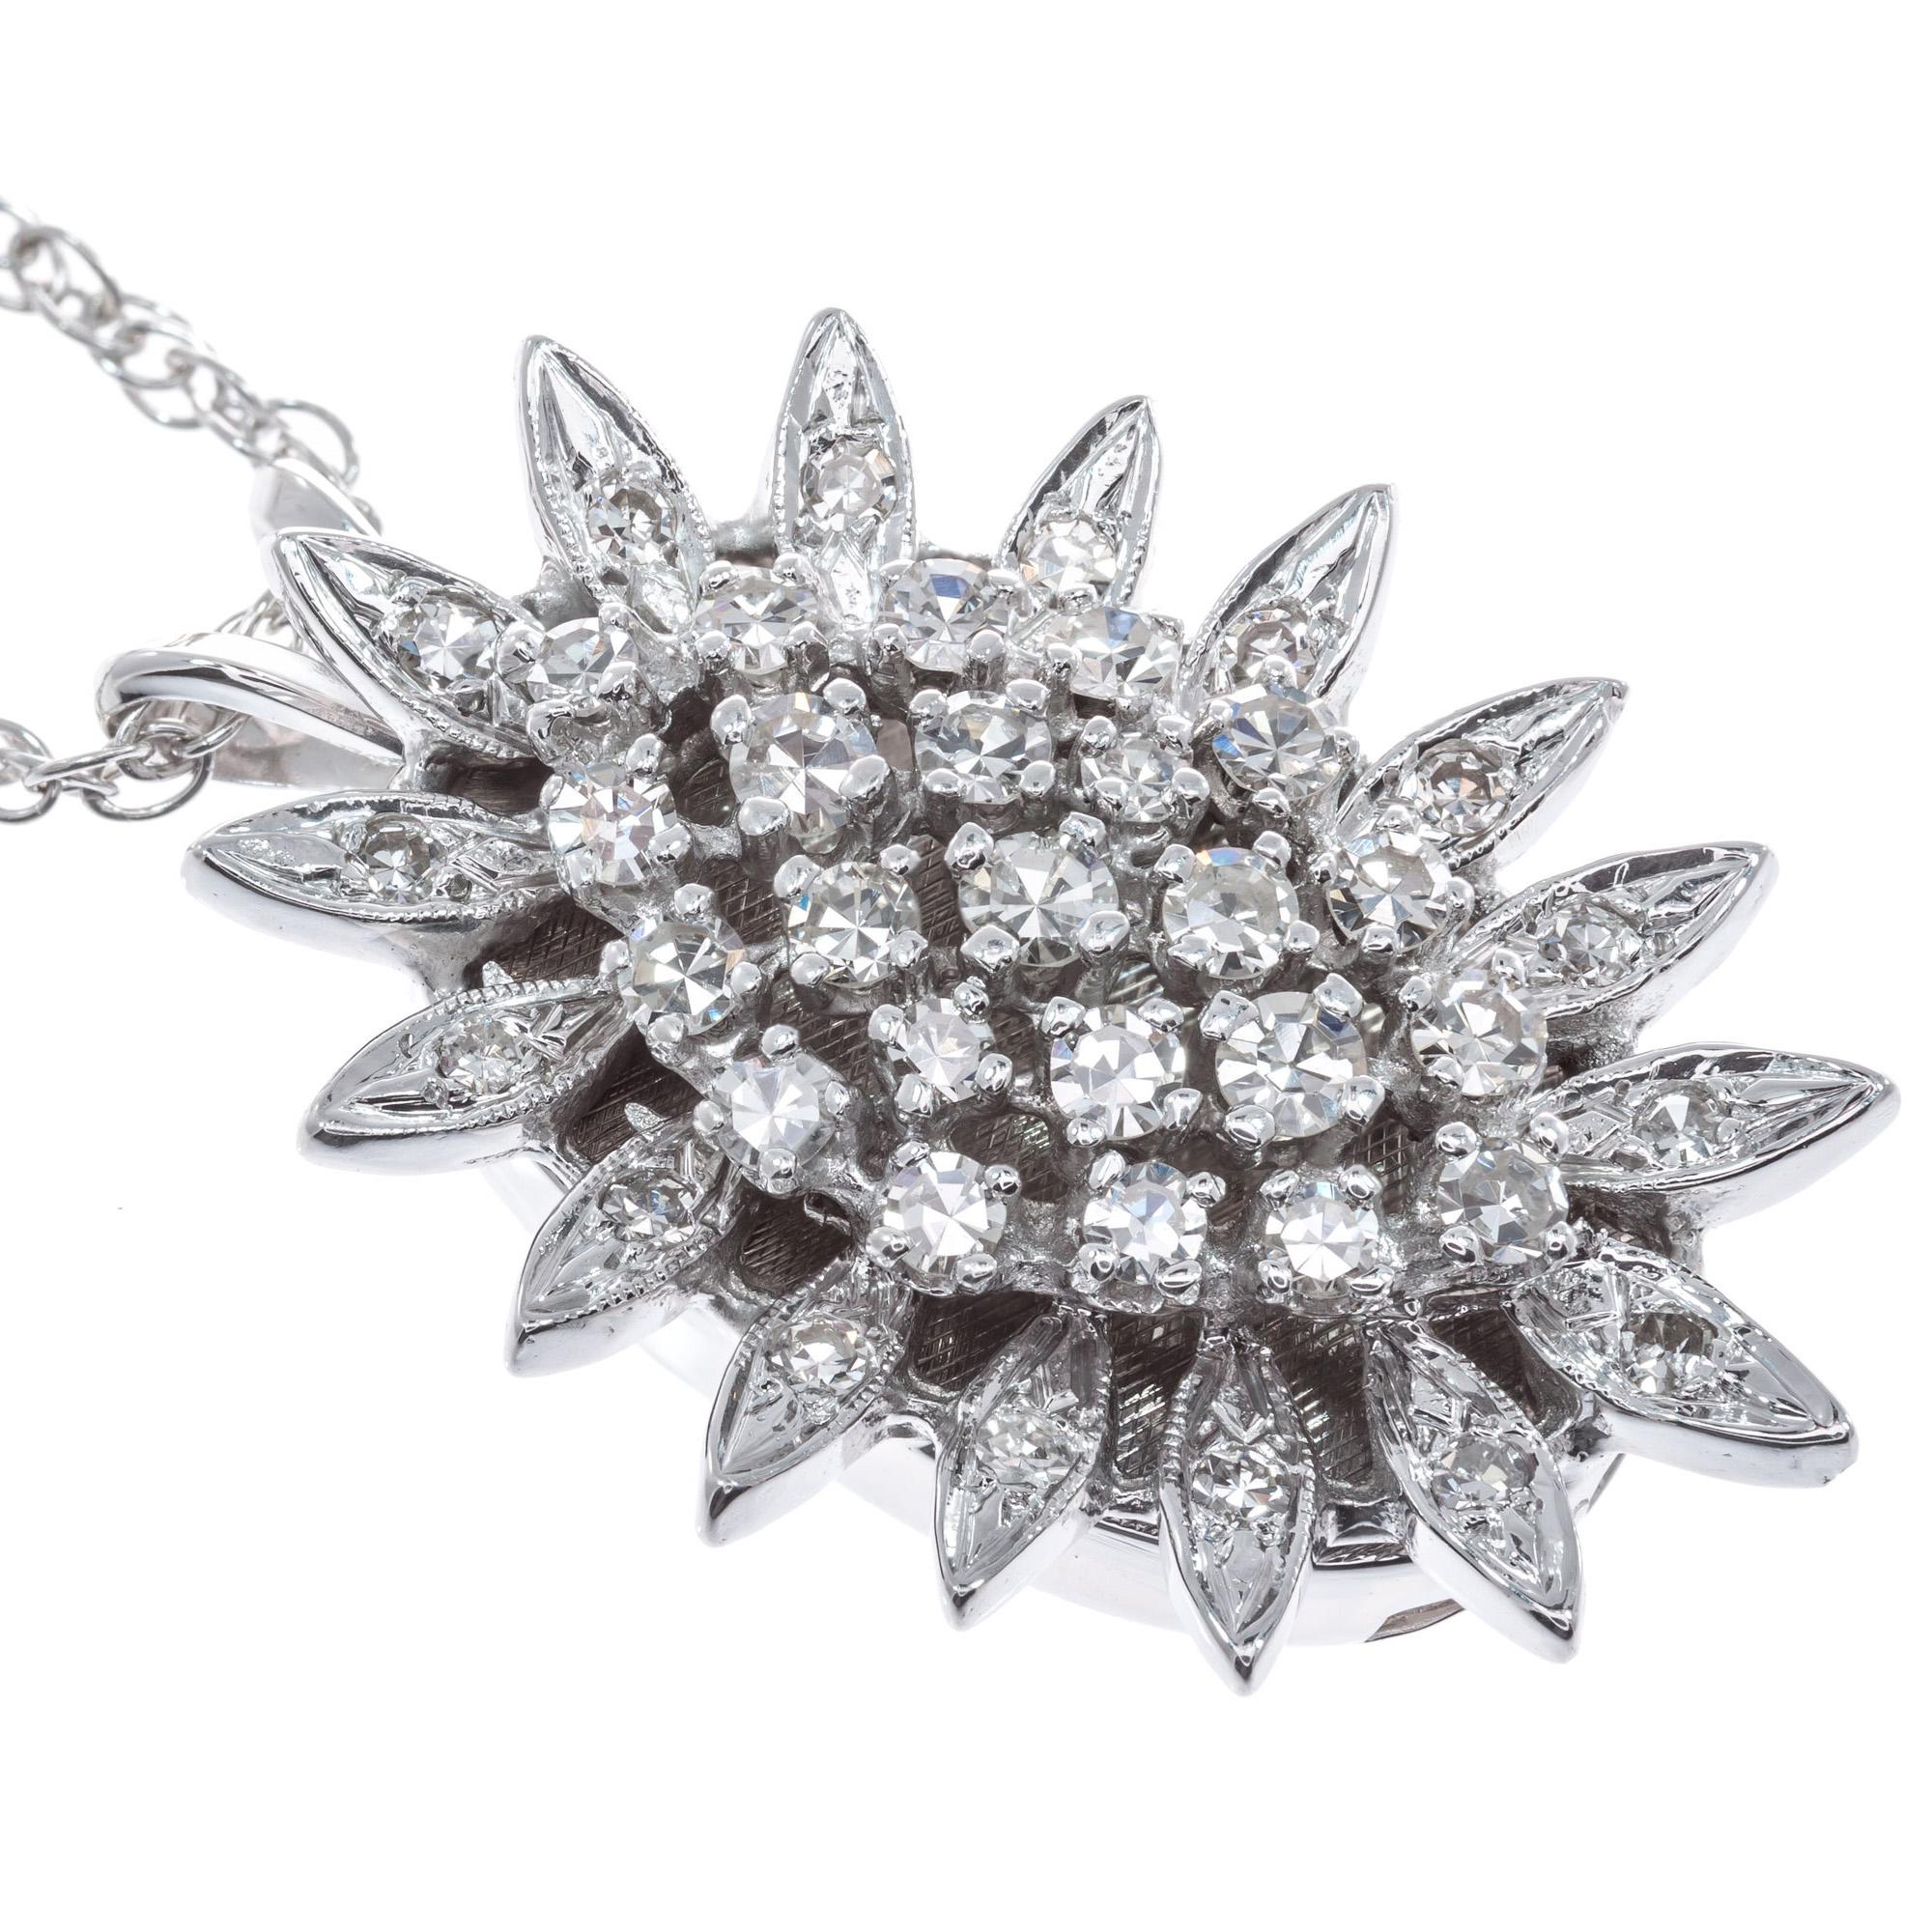 1950’s Round diamond pendant necklace. Pineapple design in 14k white gold with round diamond cluster center and a halo of round diamonds. 

39 single cut I-J SI diamonds, Approximate .62 total carat weight 
14k white gold 
Total Chain Length: 20